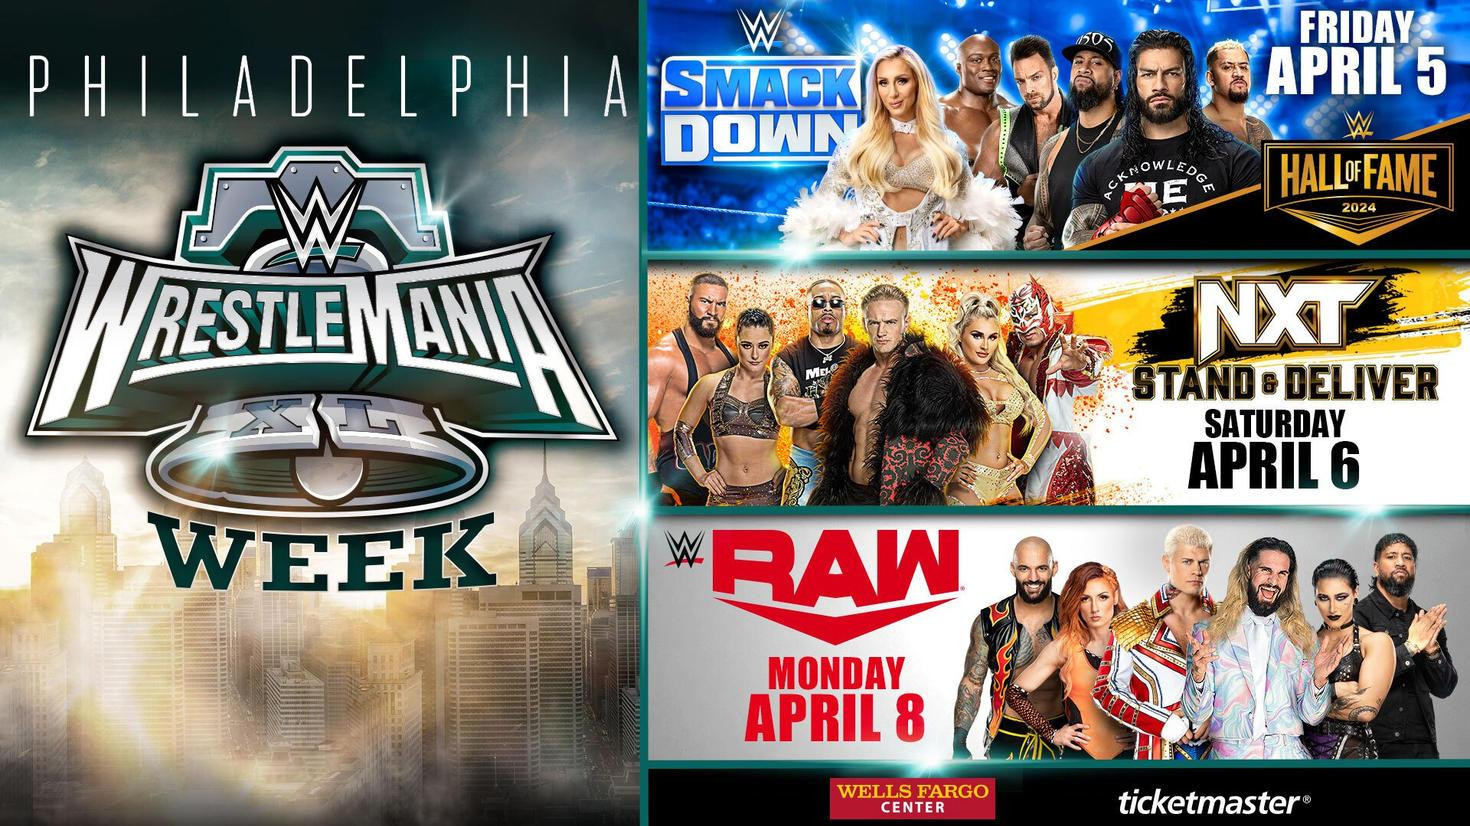 WWE Announces WrestleMania Week Schedule; NXT Stand & Deliver Set For